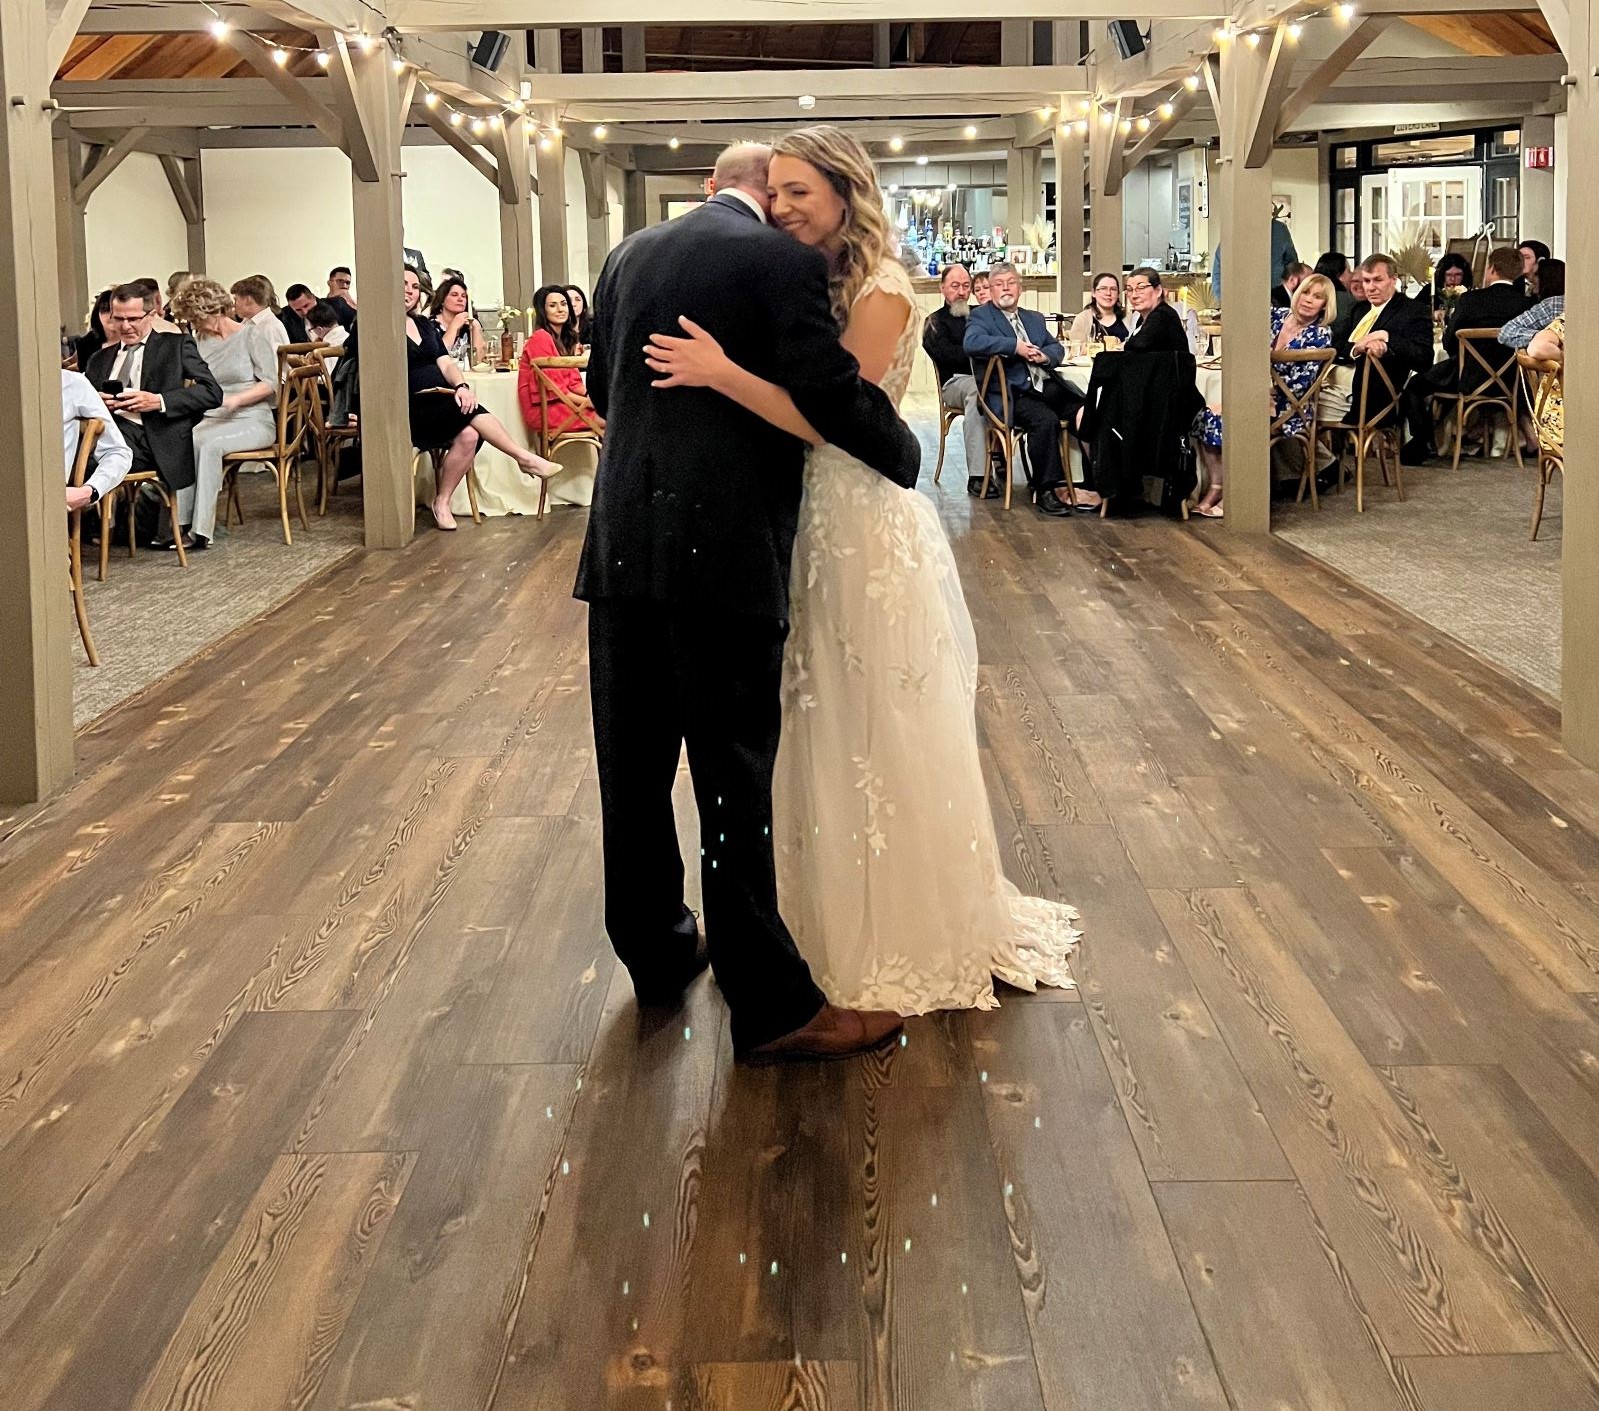 A Father-Daughter Wedding Dance Like No Other